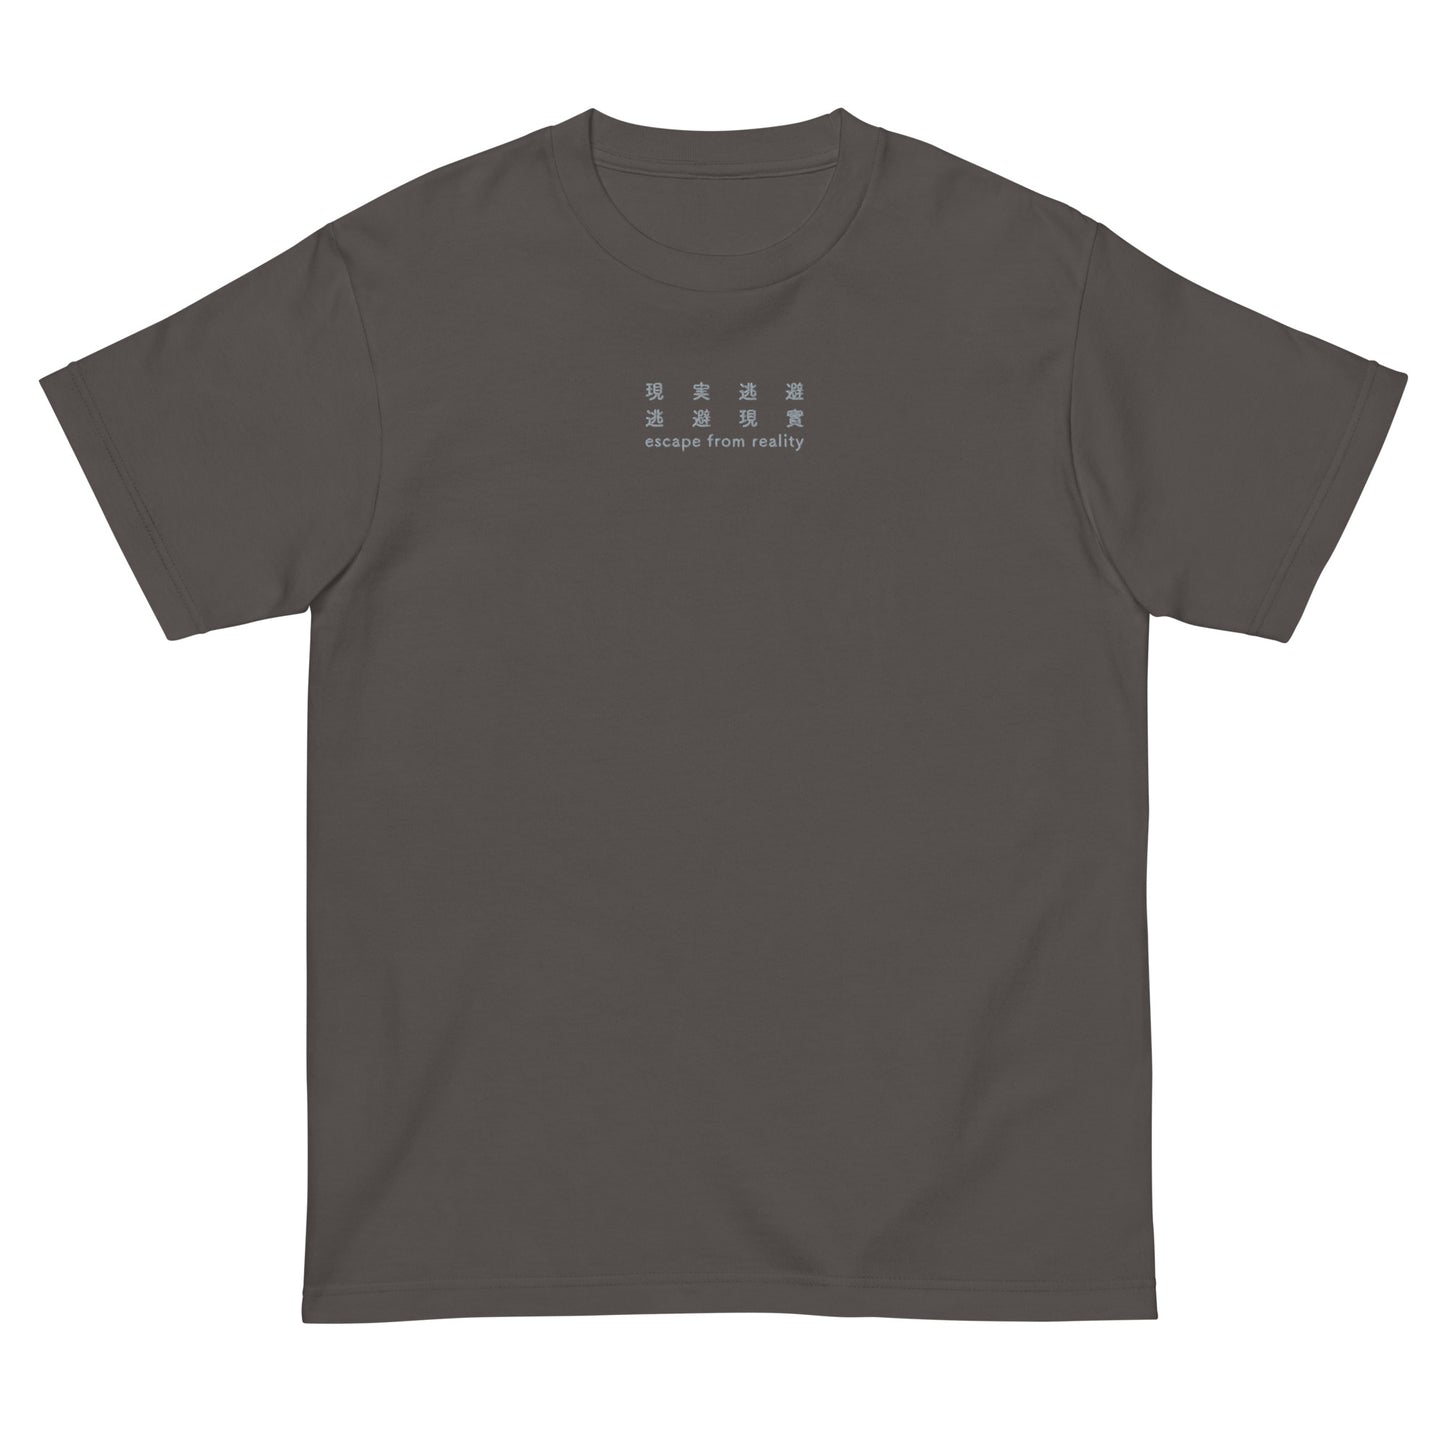 Dark Gray High Quality Tee - Front Design with an Light Gray Embroidery "Escape From Reality" in Japanese,Chinese and English